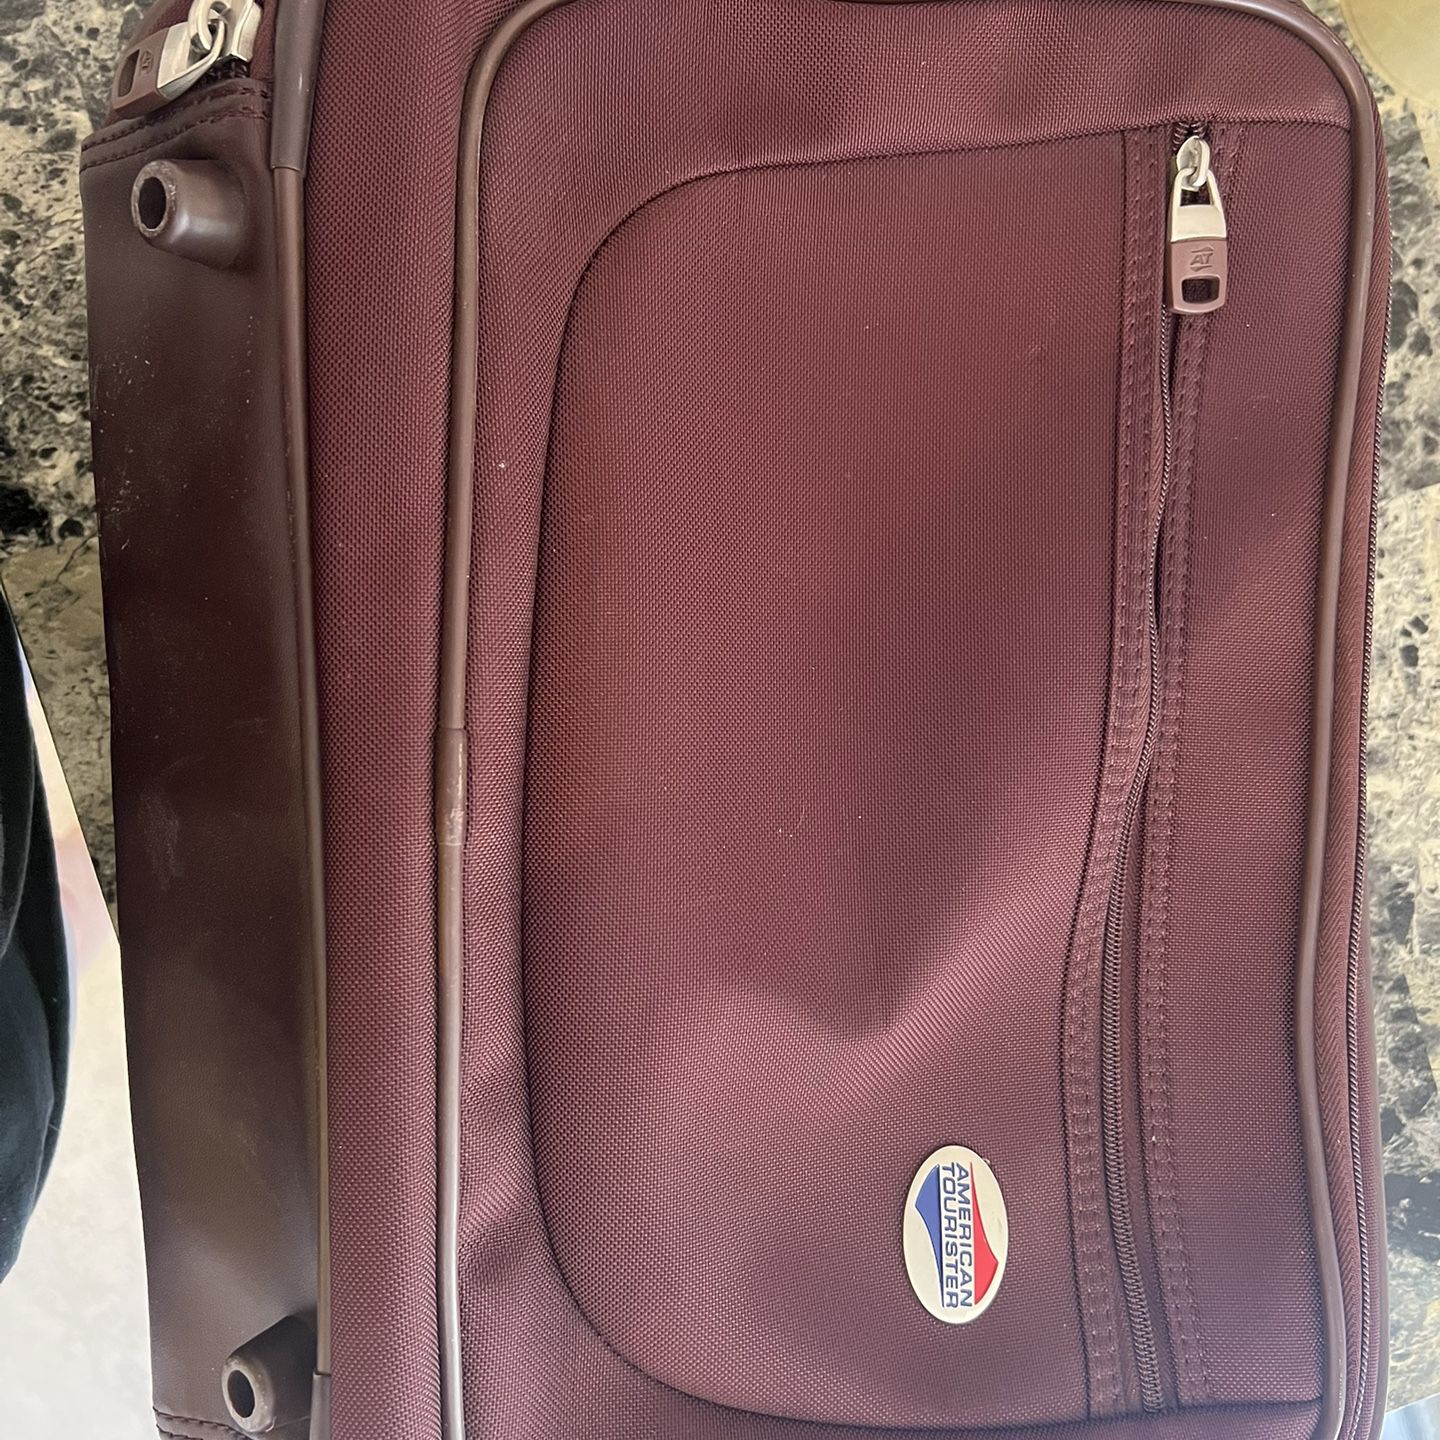 3-Pieces Used Luggage Set for Sale in Scottsdale, AZ - OfferUp